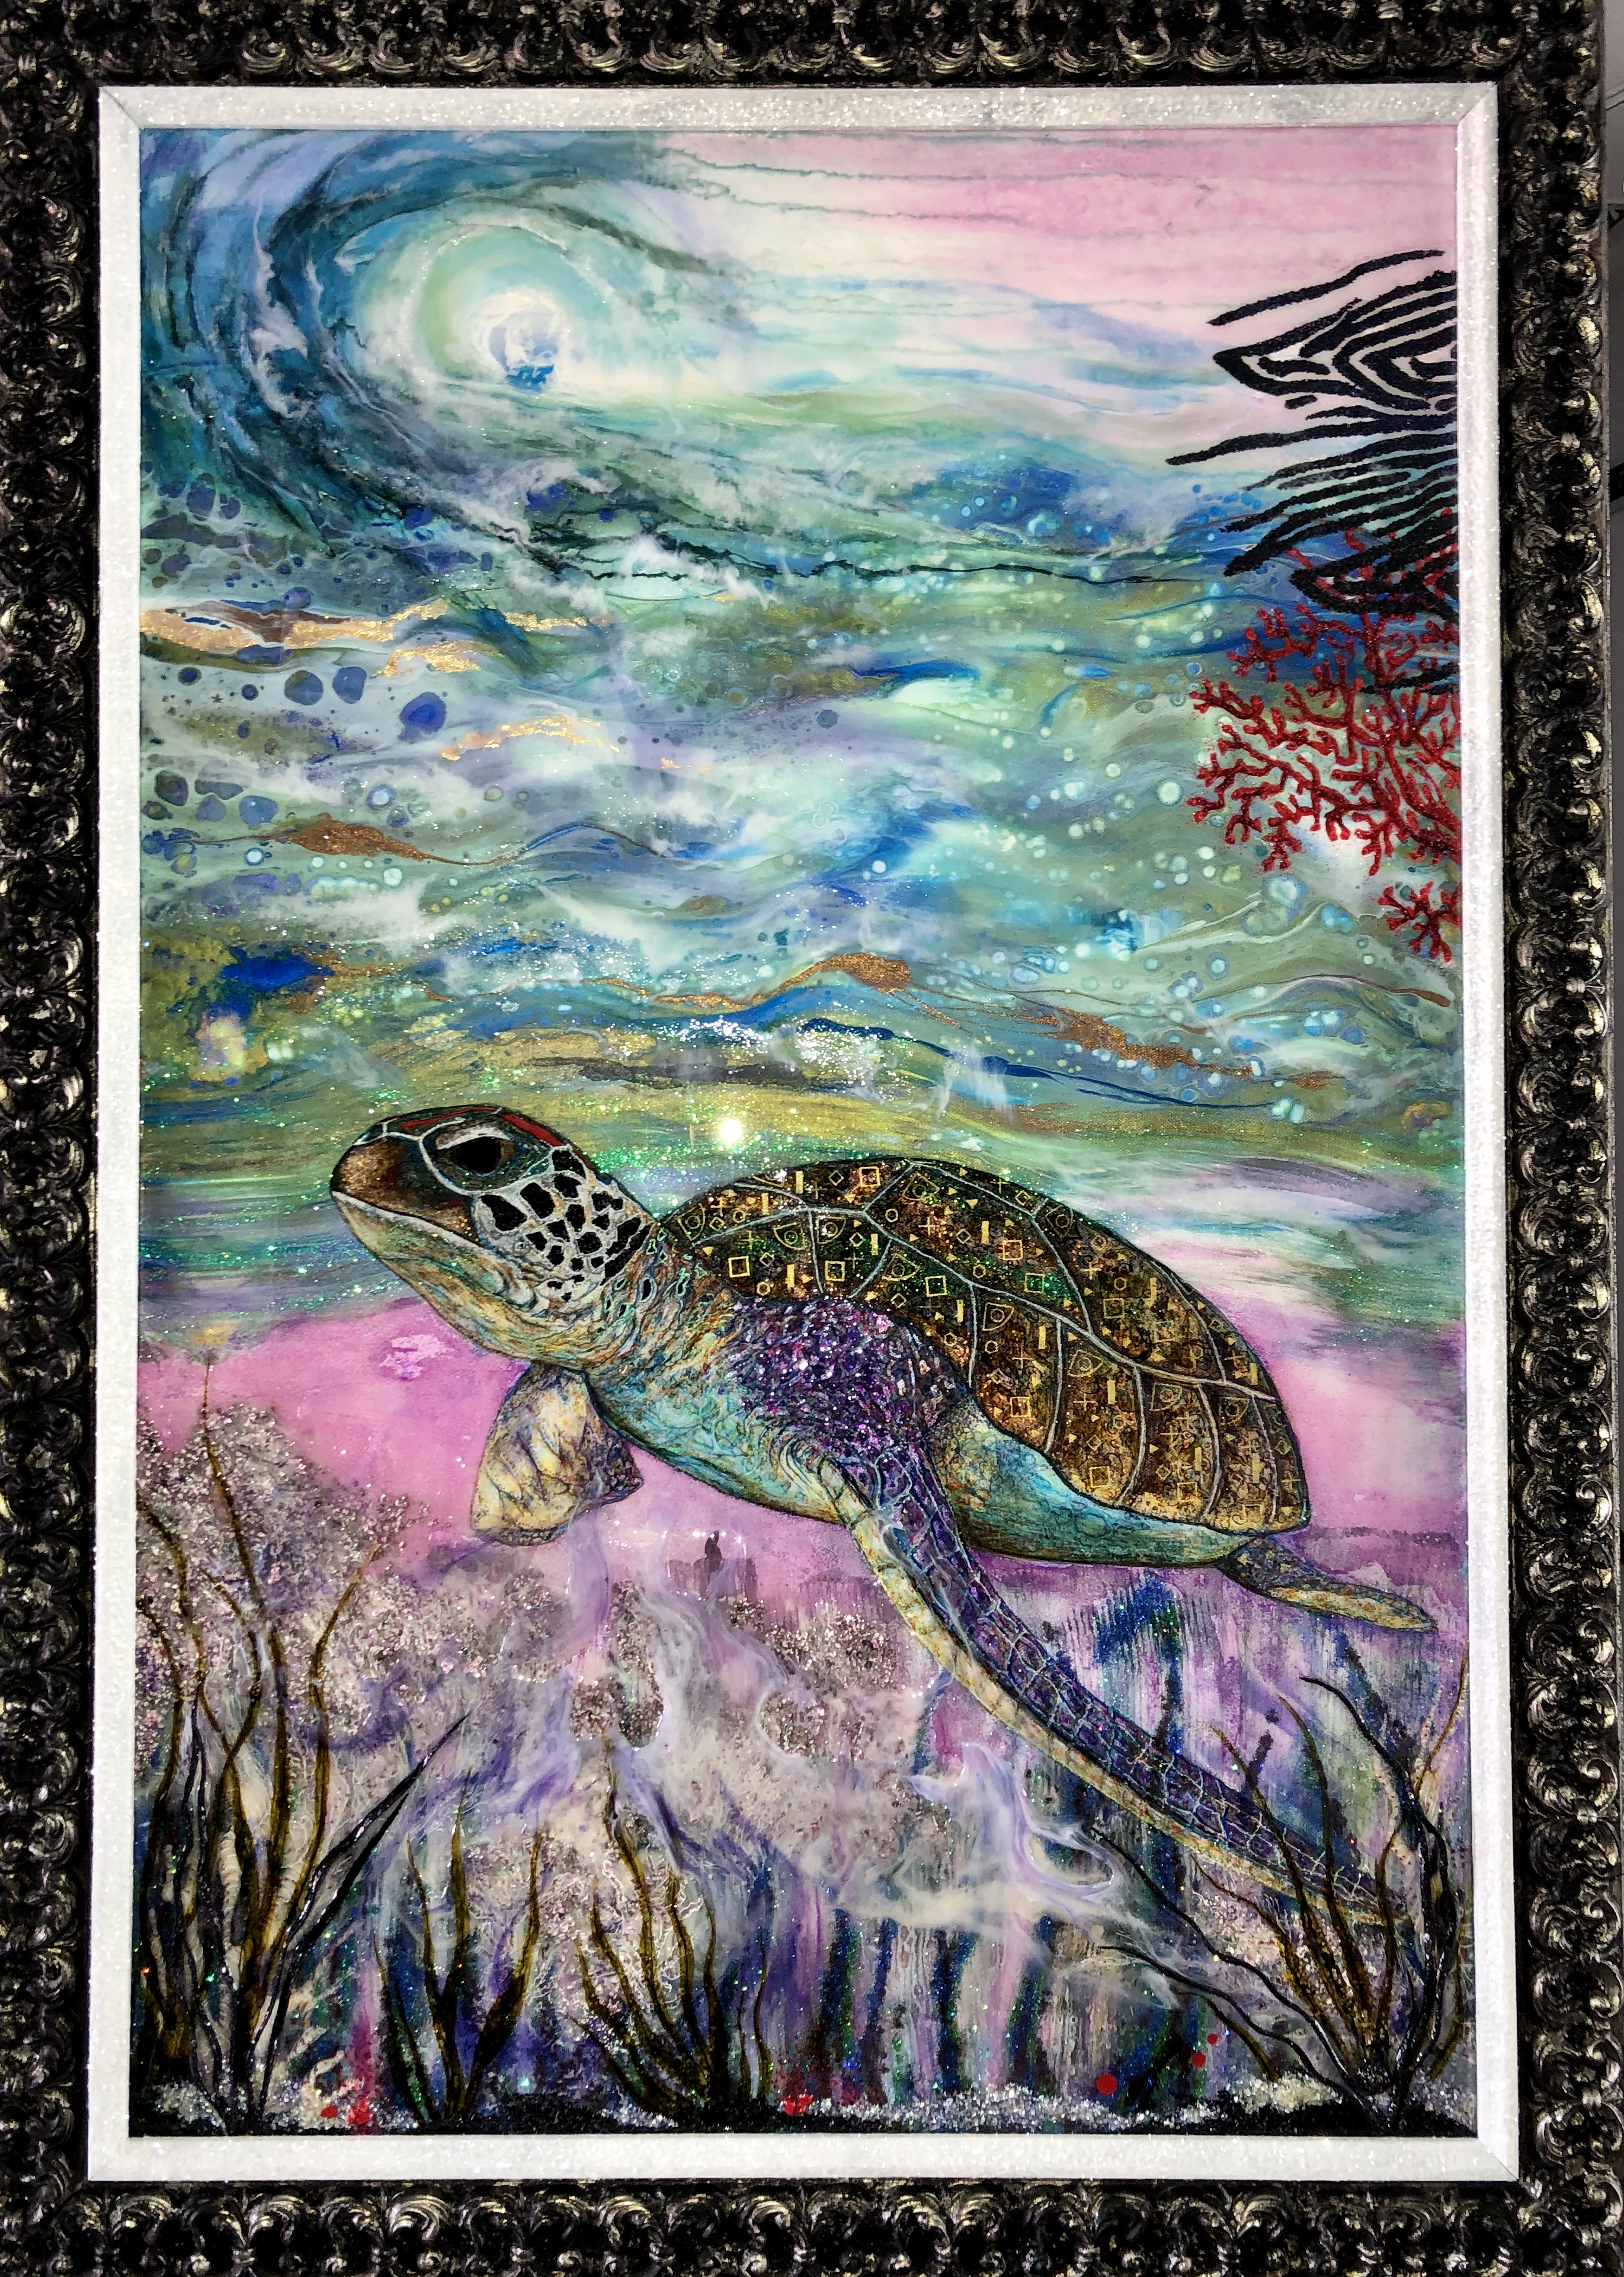 turtle, zebra, ocean, resin, amethyst, glass, red coral, sea grass, mixed media, acrylic painting